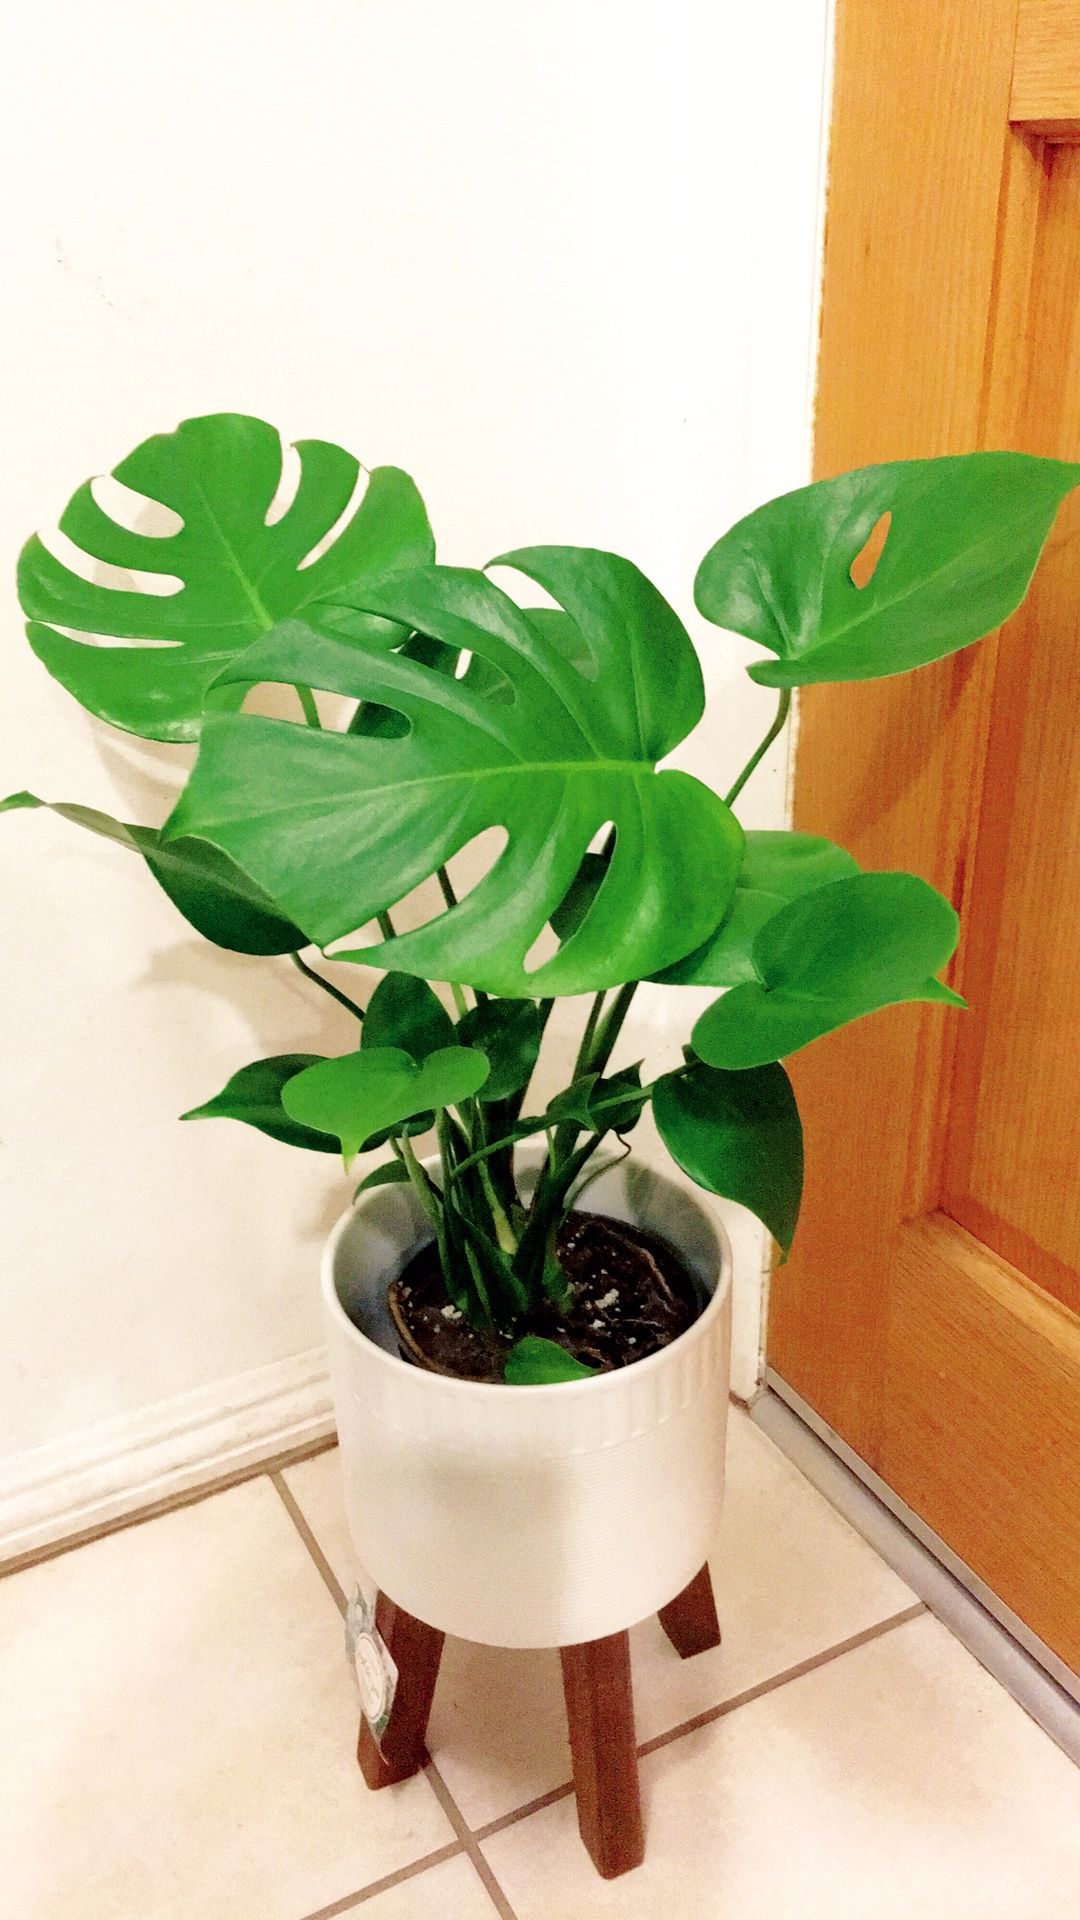 Monstera Deliciosa Plant - Indoor Plant - $15 Plant Only - PLANTER NOT INCLUDED